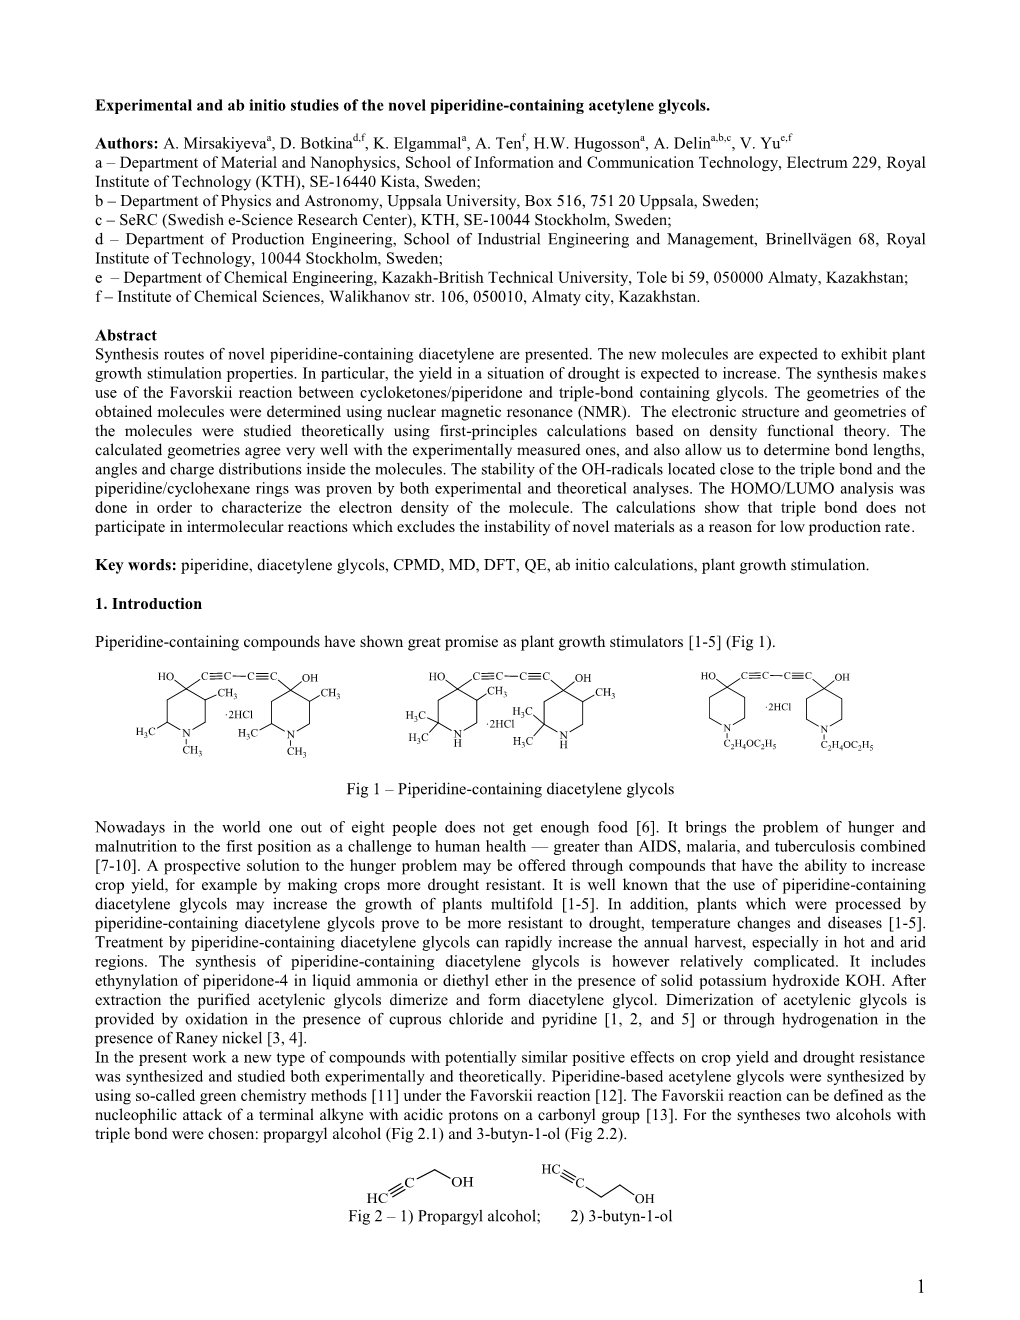 Experimental and Ab Initio Studies of the Novel Piperidine-Containing Acetylene Glycols